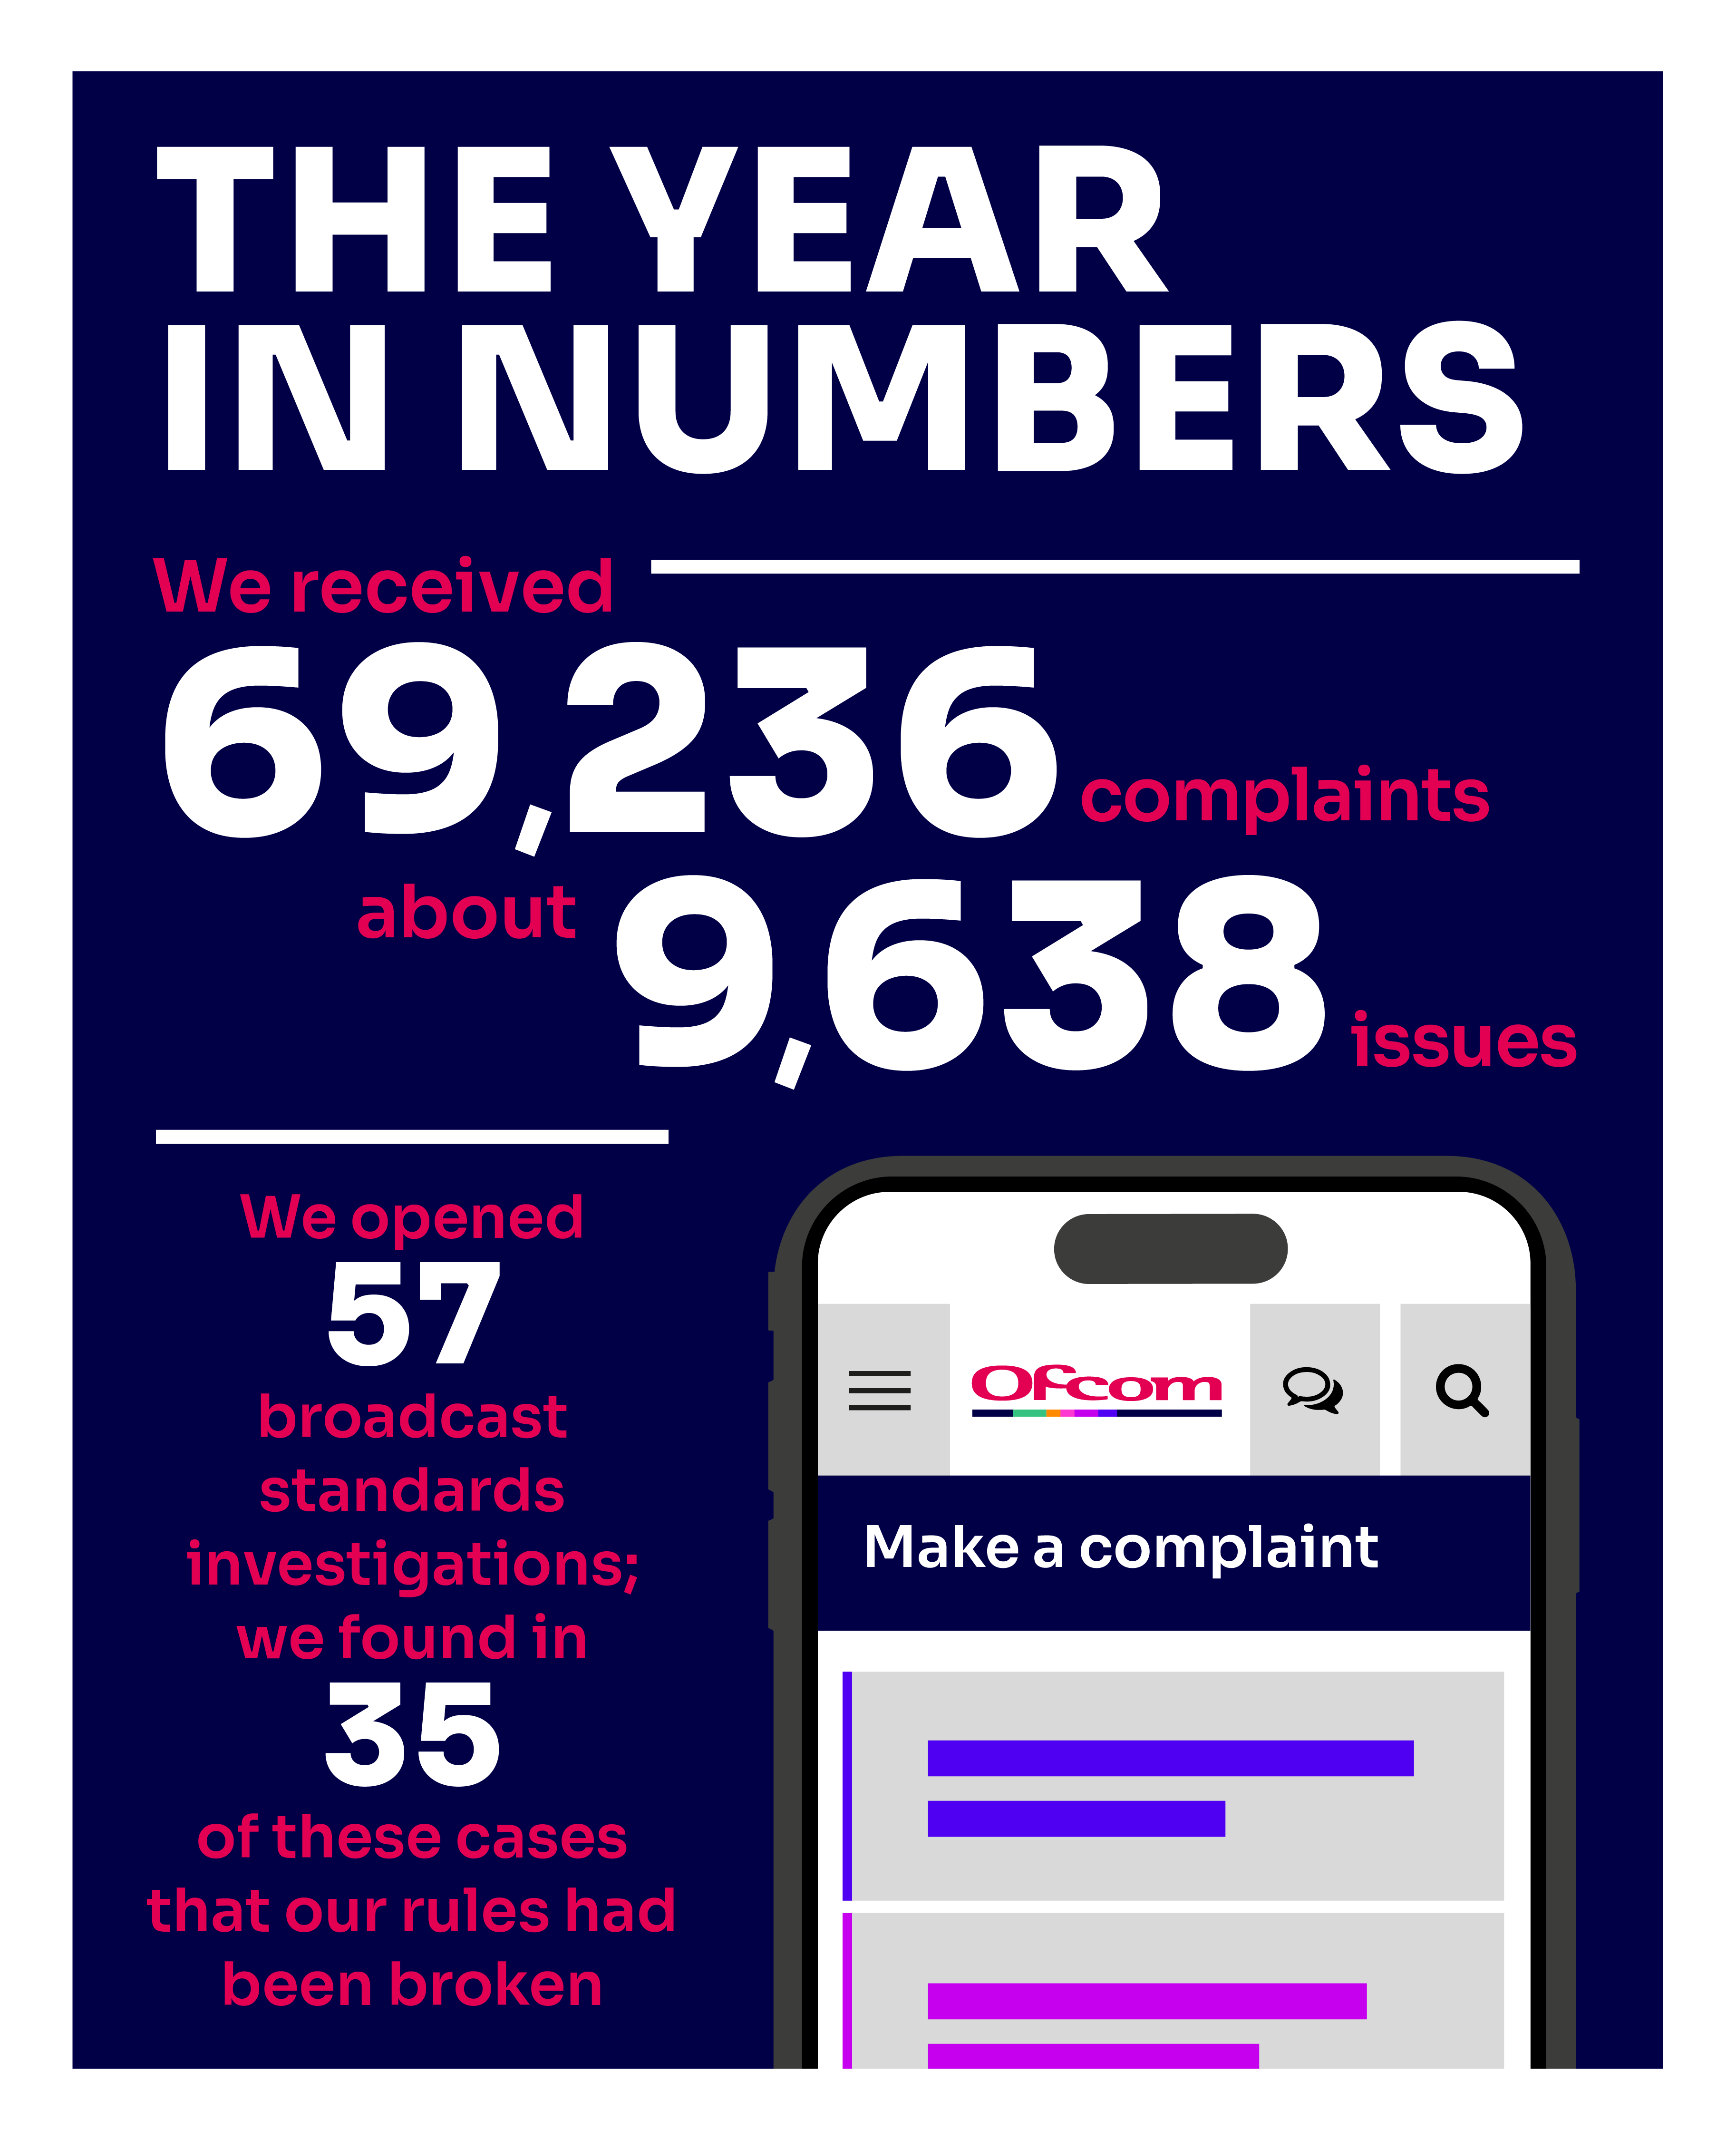 During the year, we received 69,236 complaints about 9,638 issues. We completed 57 broadcast standards investigations; we found in 35 of these cases that our rules had been broken. 